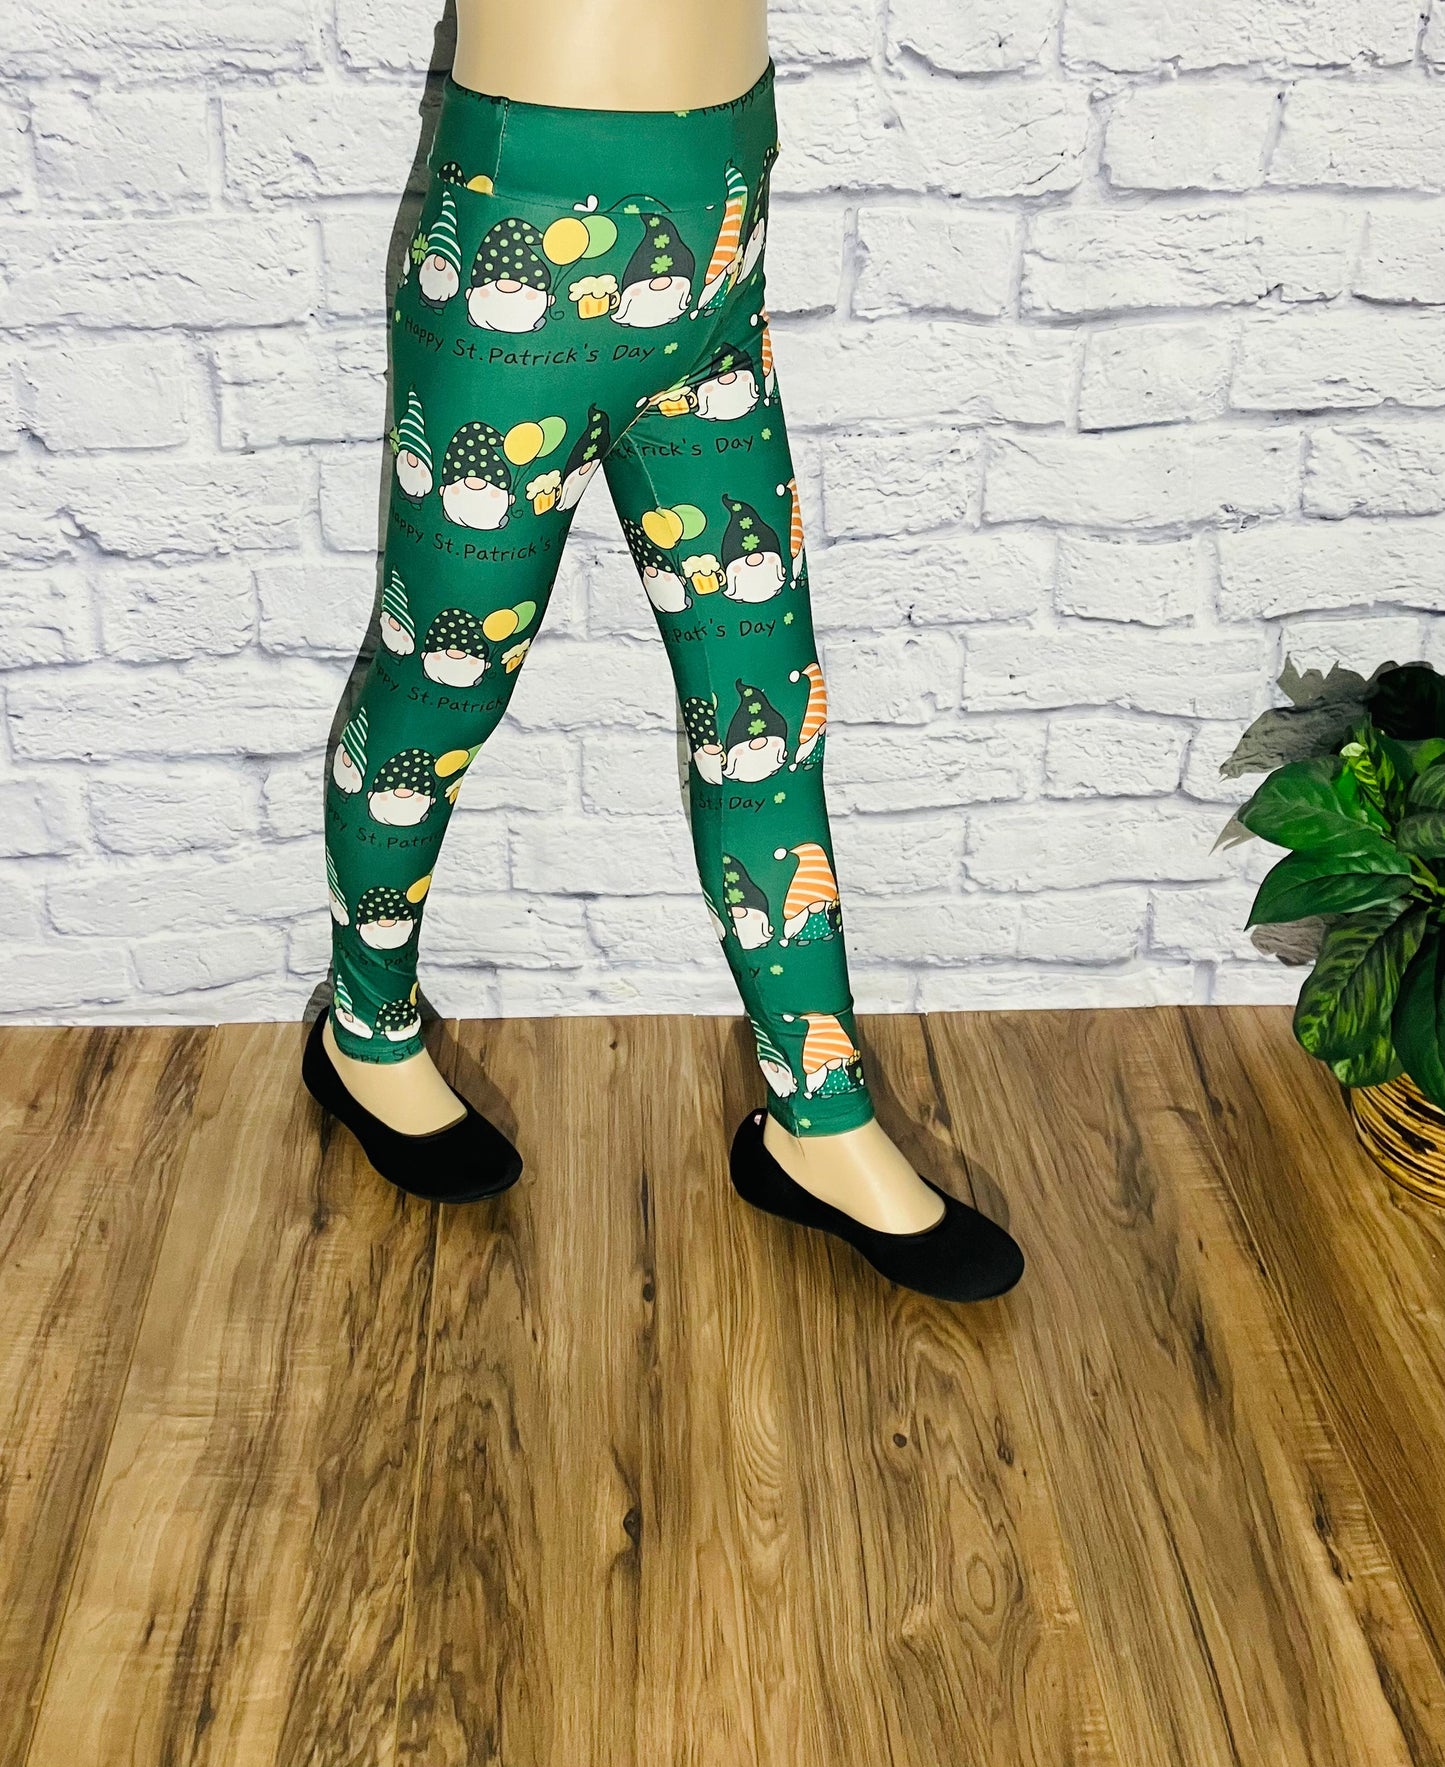 Girls Leggings | Exclusive St. Patrick Day Gnome Leggings | Yoga Pants | Footless Tights | Yoga Waistband Leggings MomMe and More 